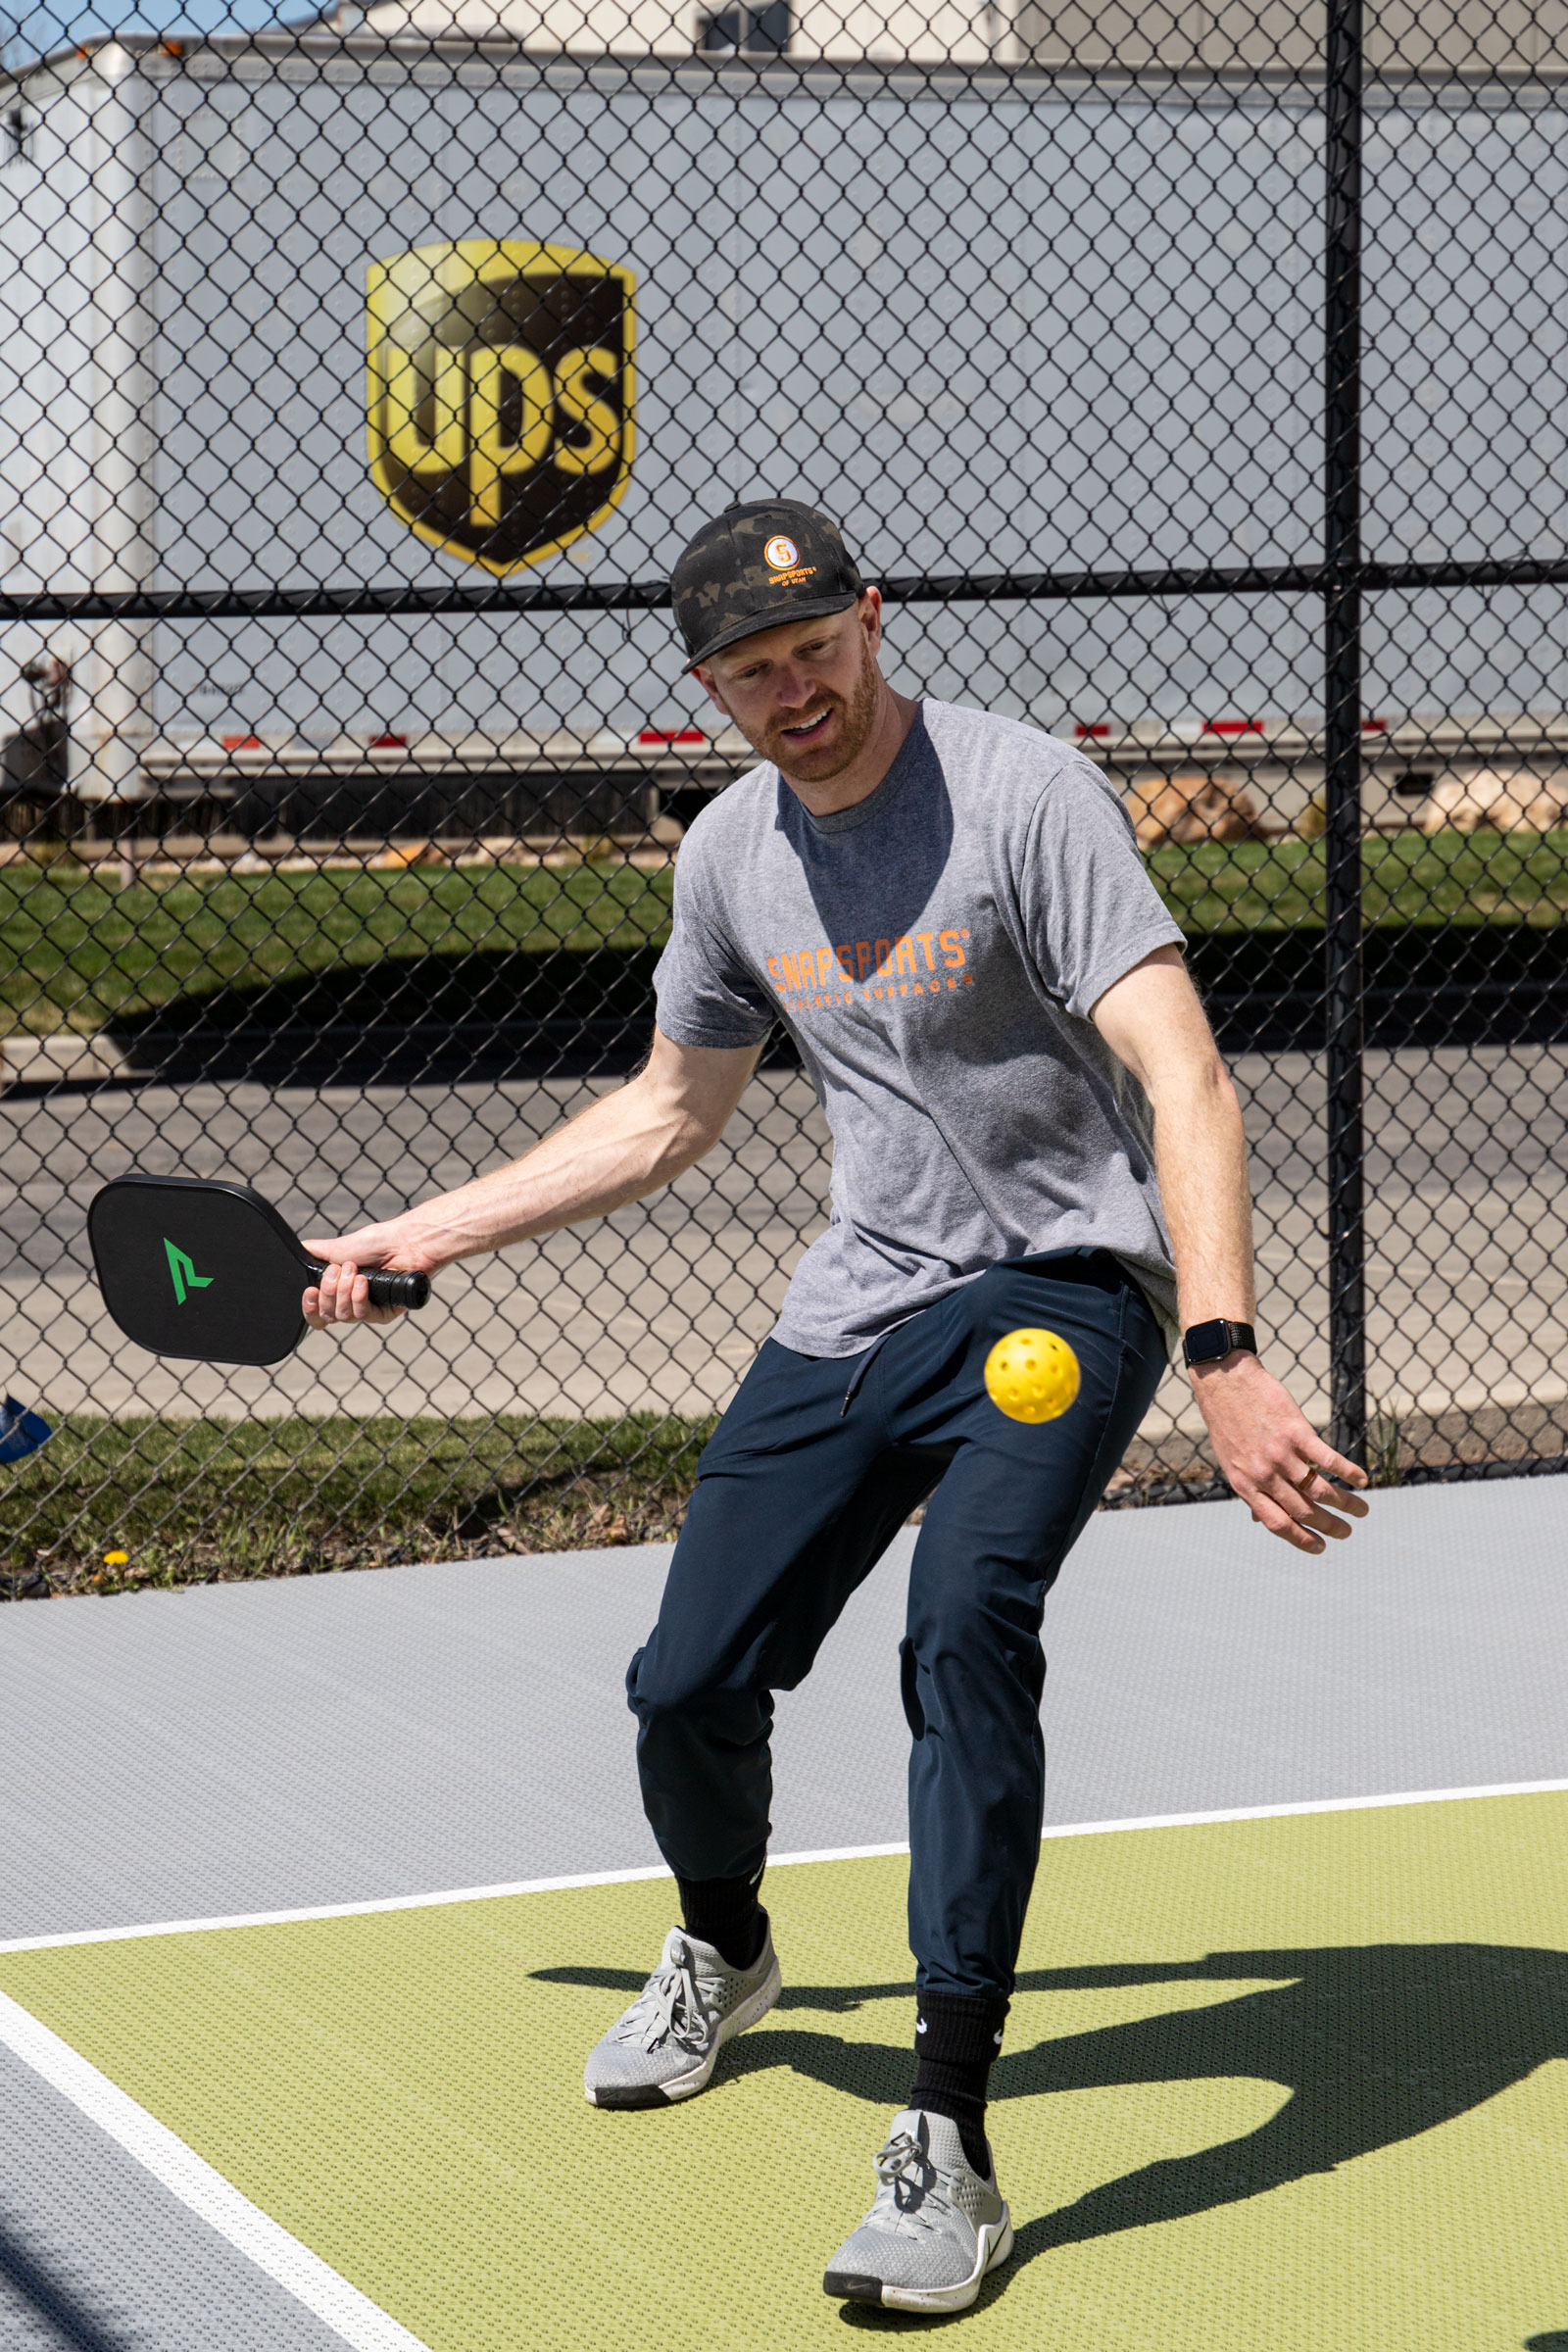 Adam Drost playing on the Pickleball court